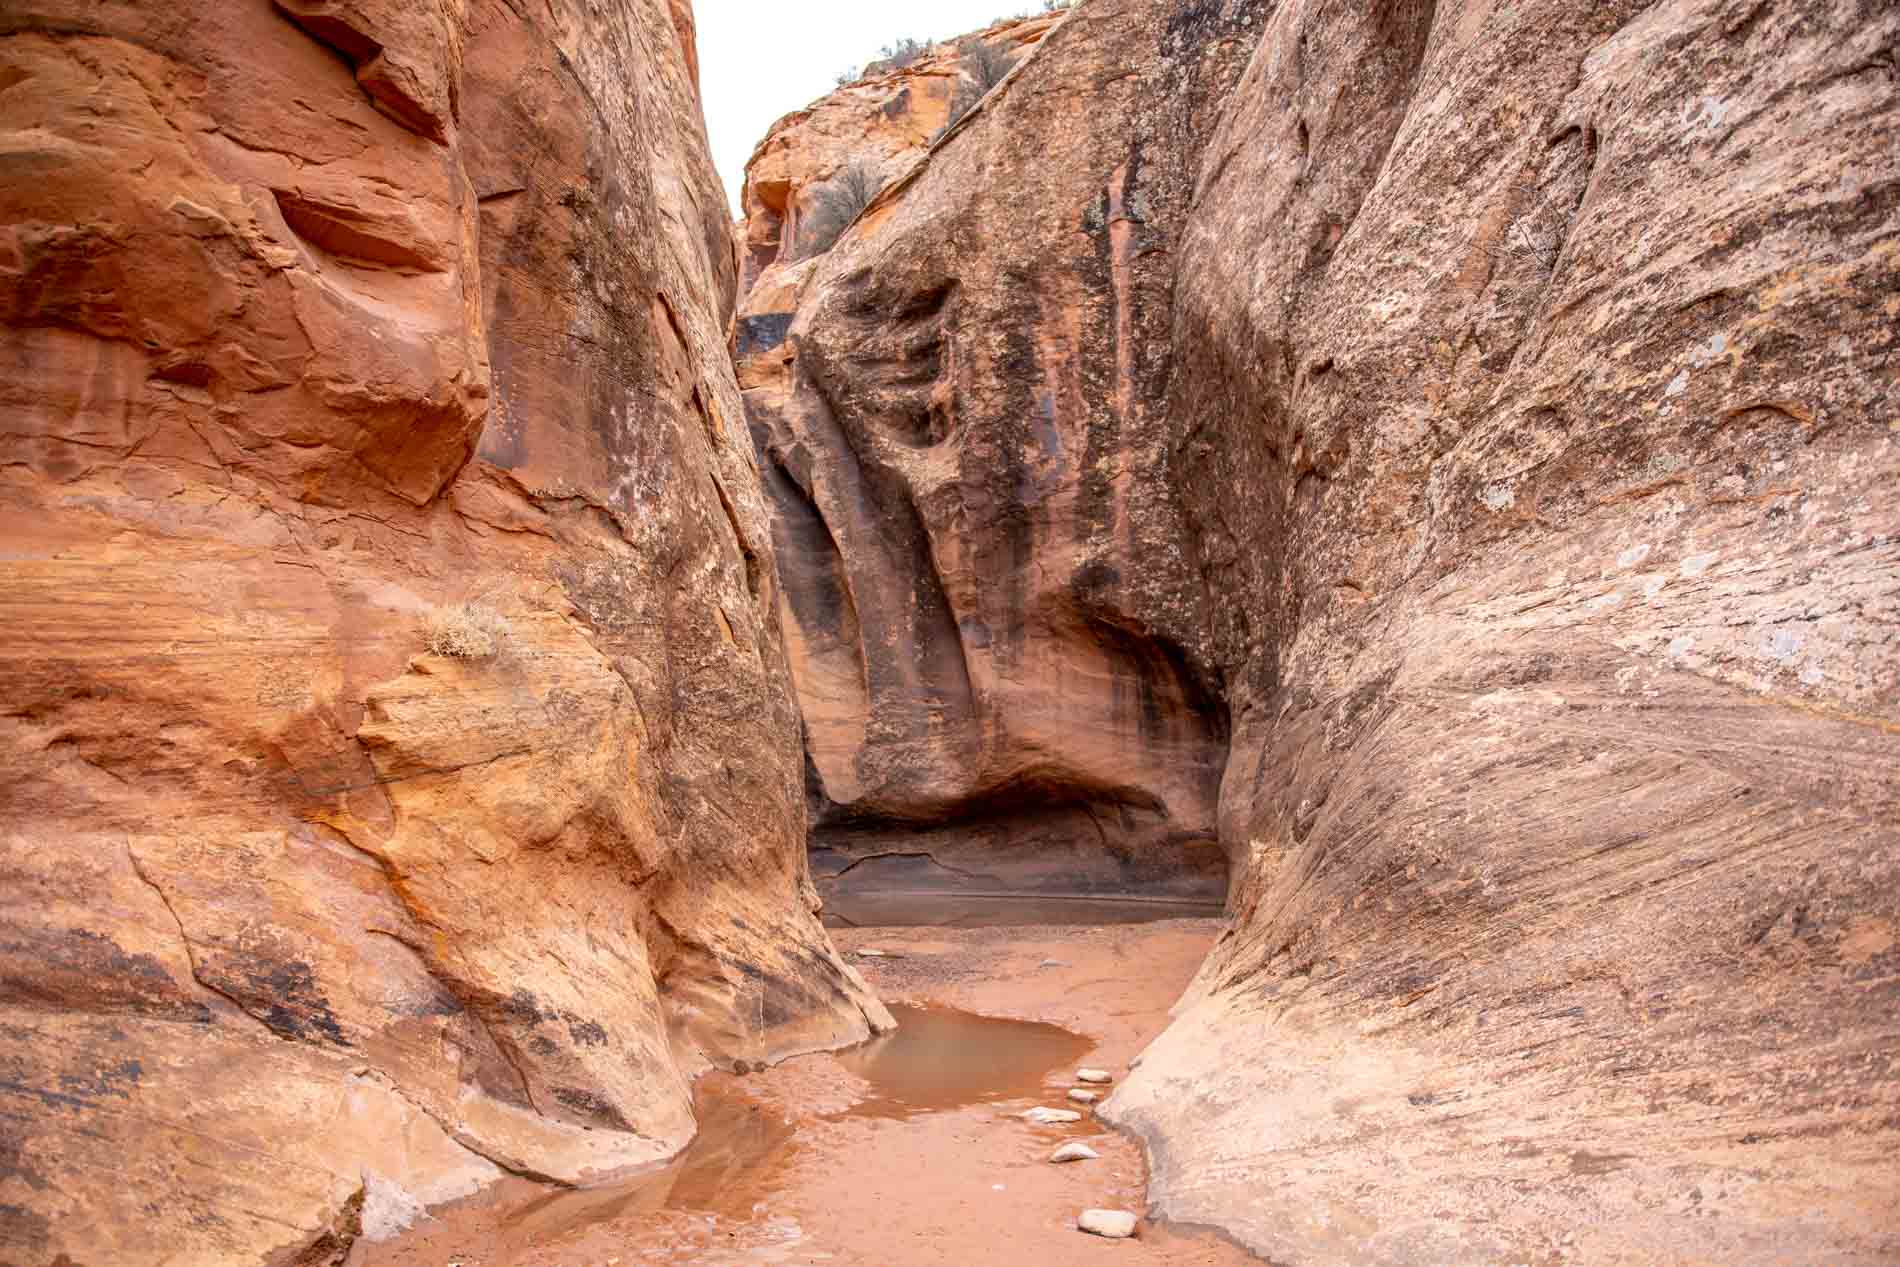 Narrow slow canyon in Utah with muddy water